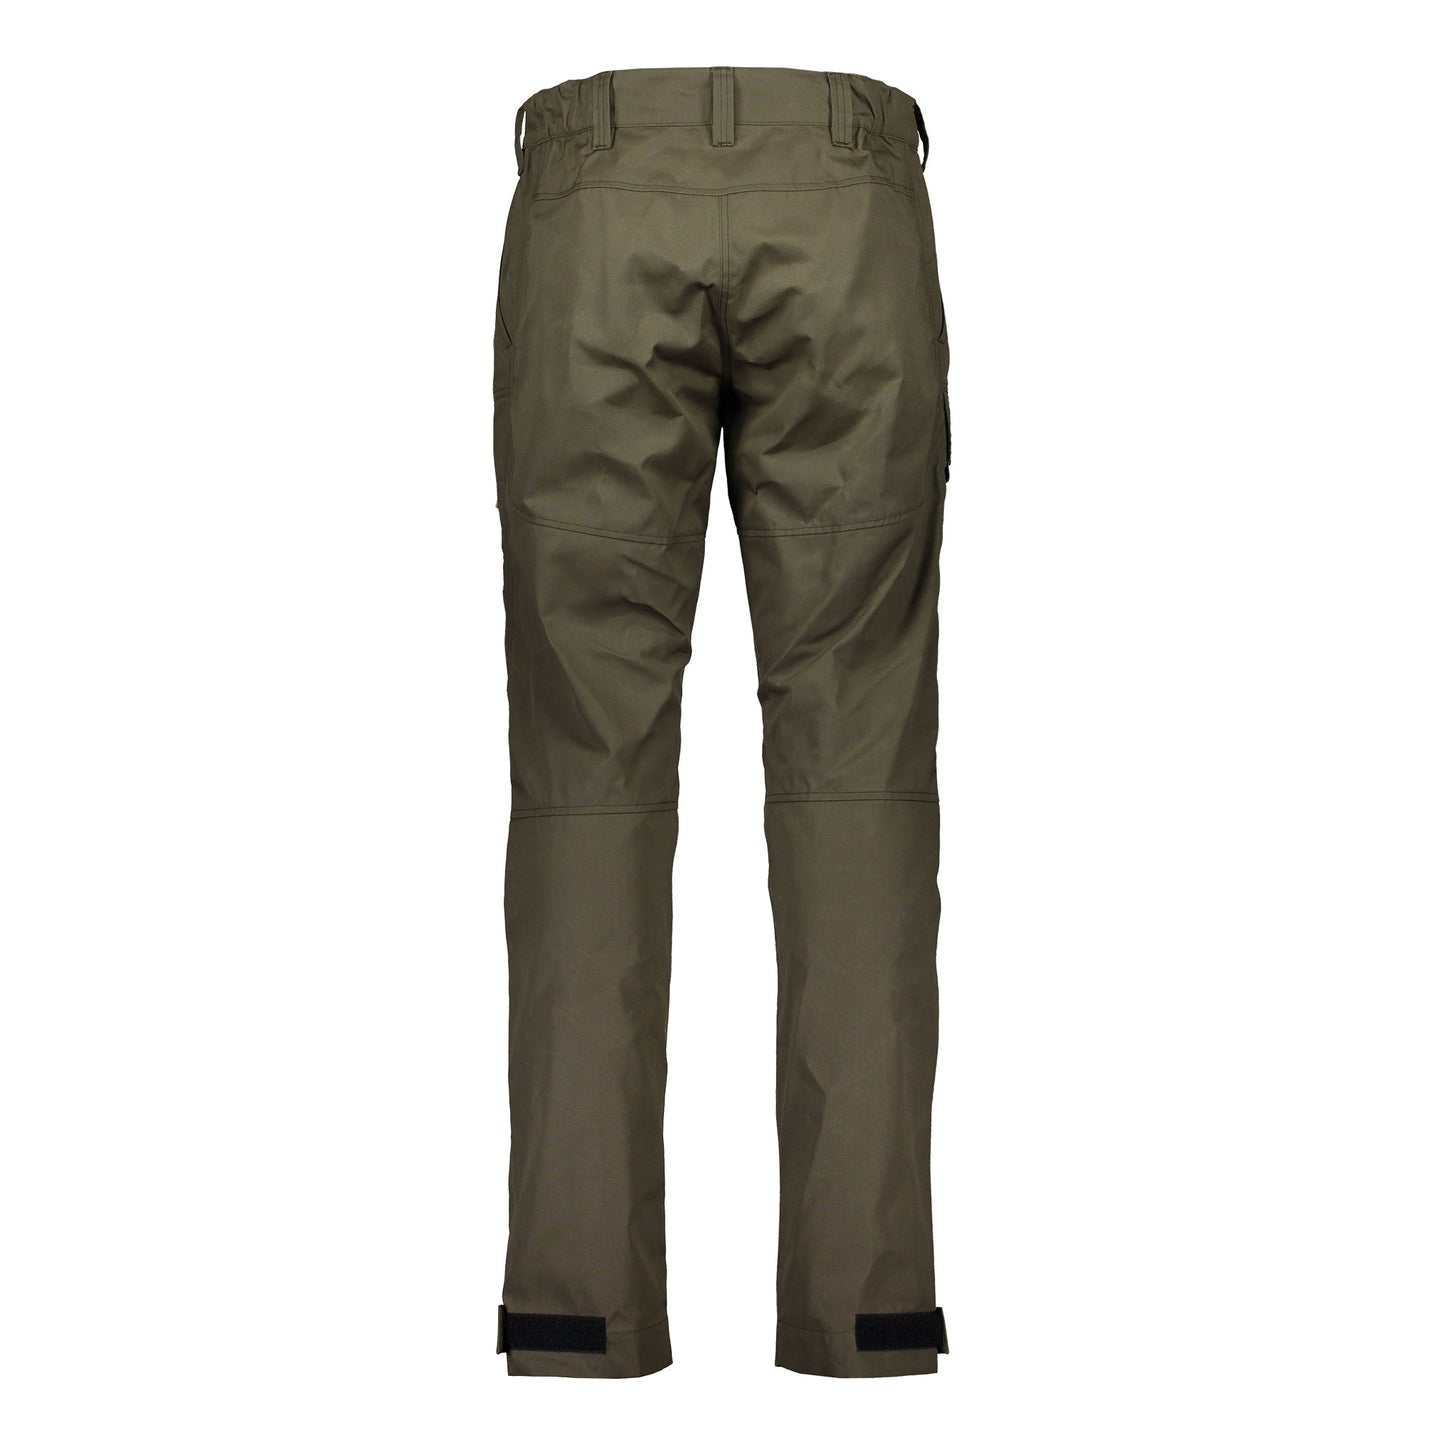 Taival trousers